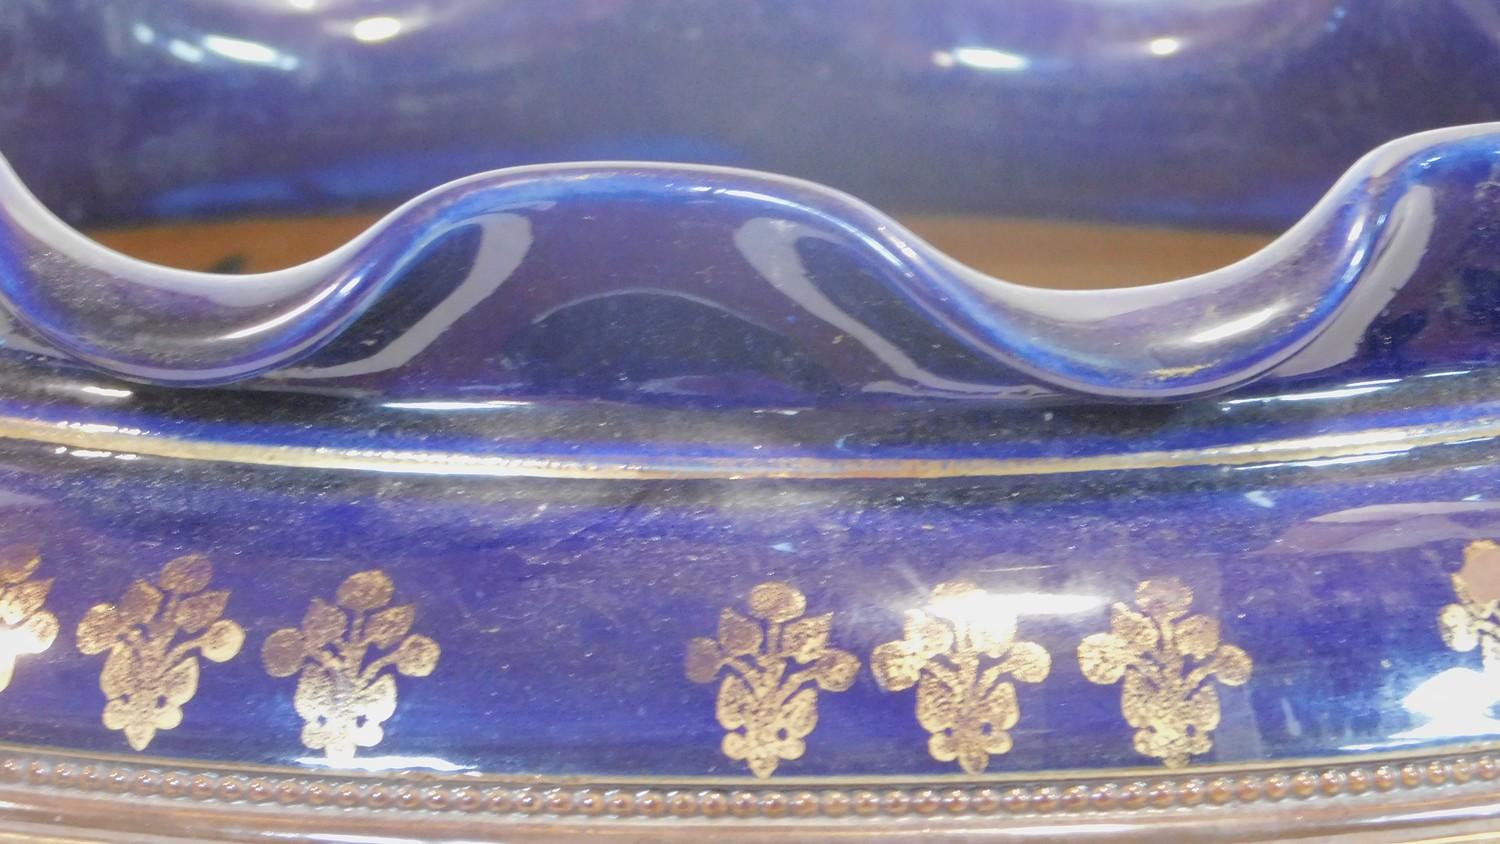 A Royal Doulton stoneware jardiniere, Slaters Patent, in deep blue glaze with textured ground of - Image 2 of 4